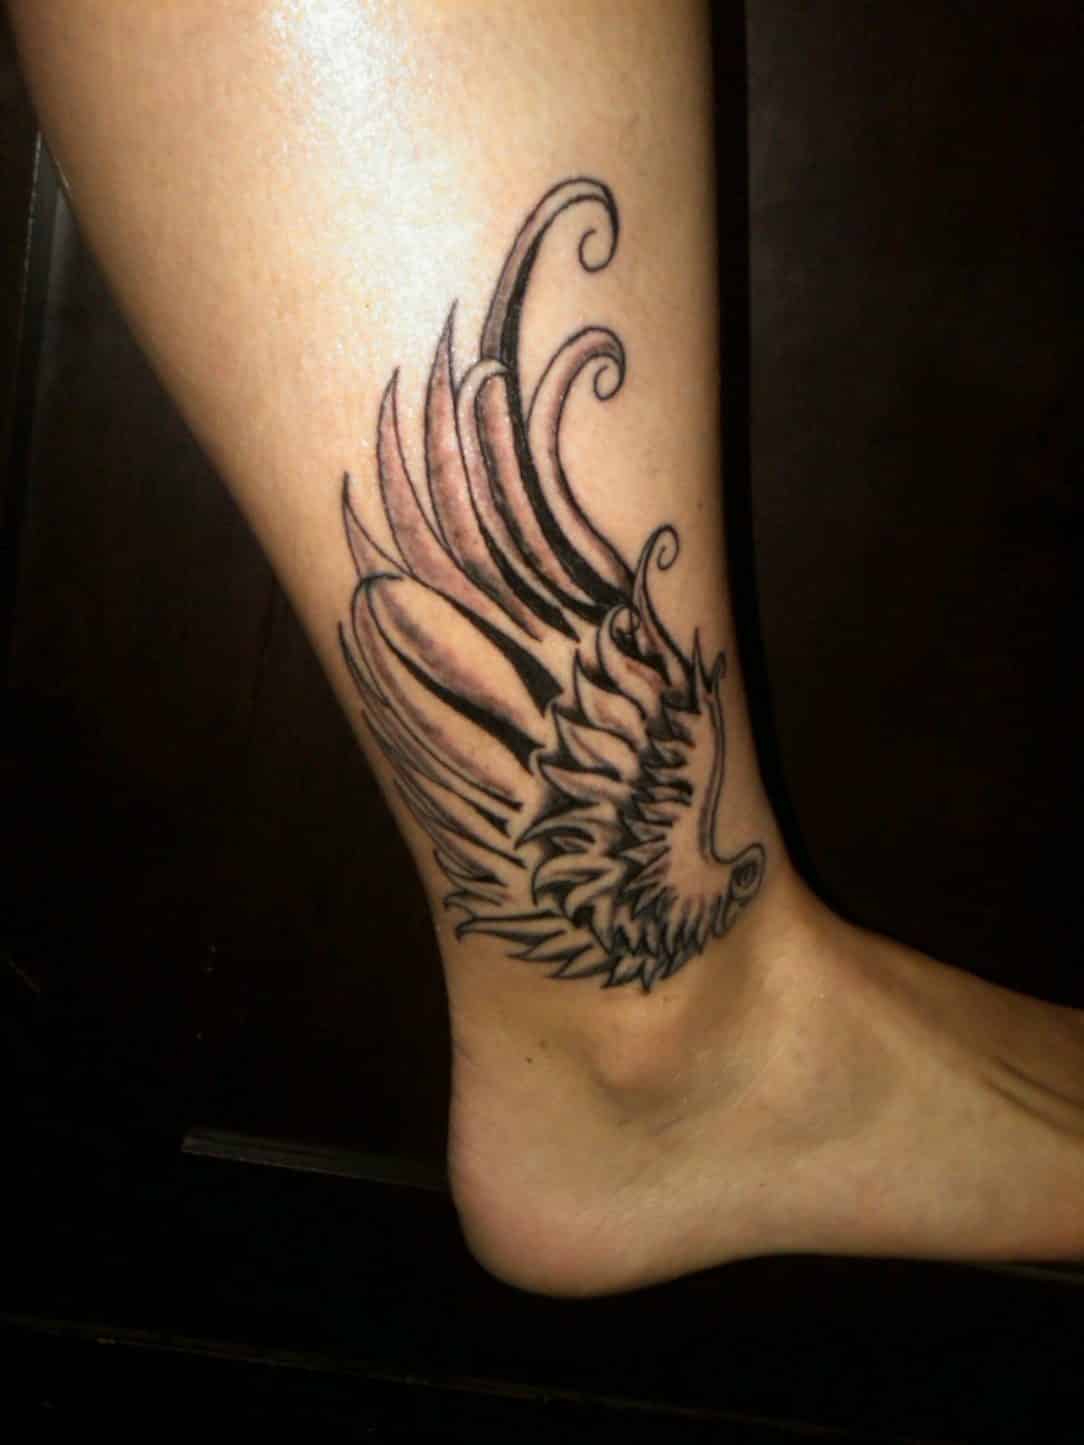 Ankle Tattoos for Men Ideas and Designs for Guys